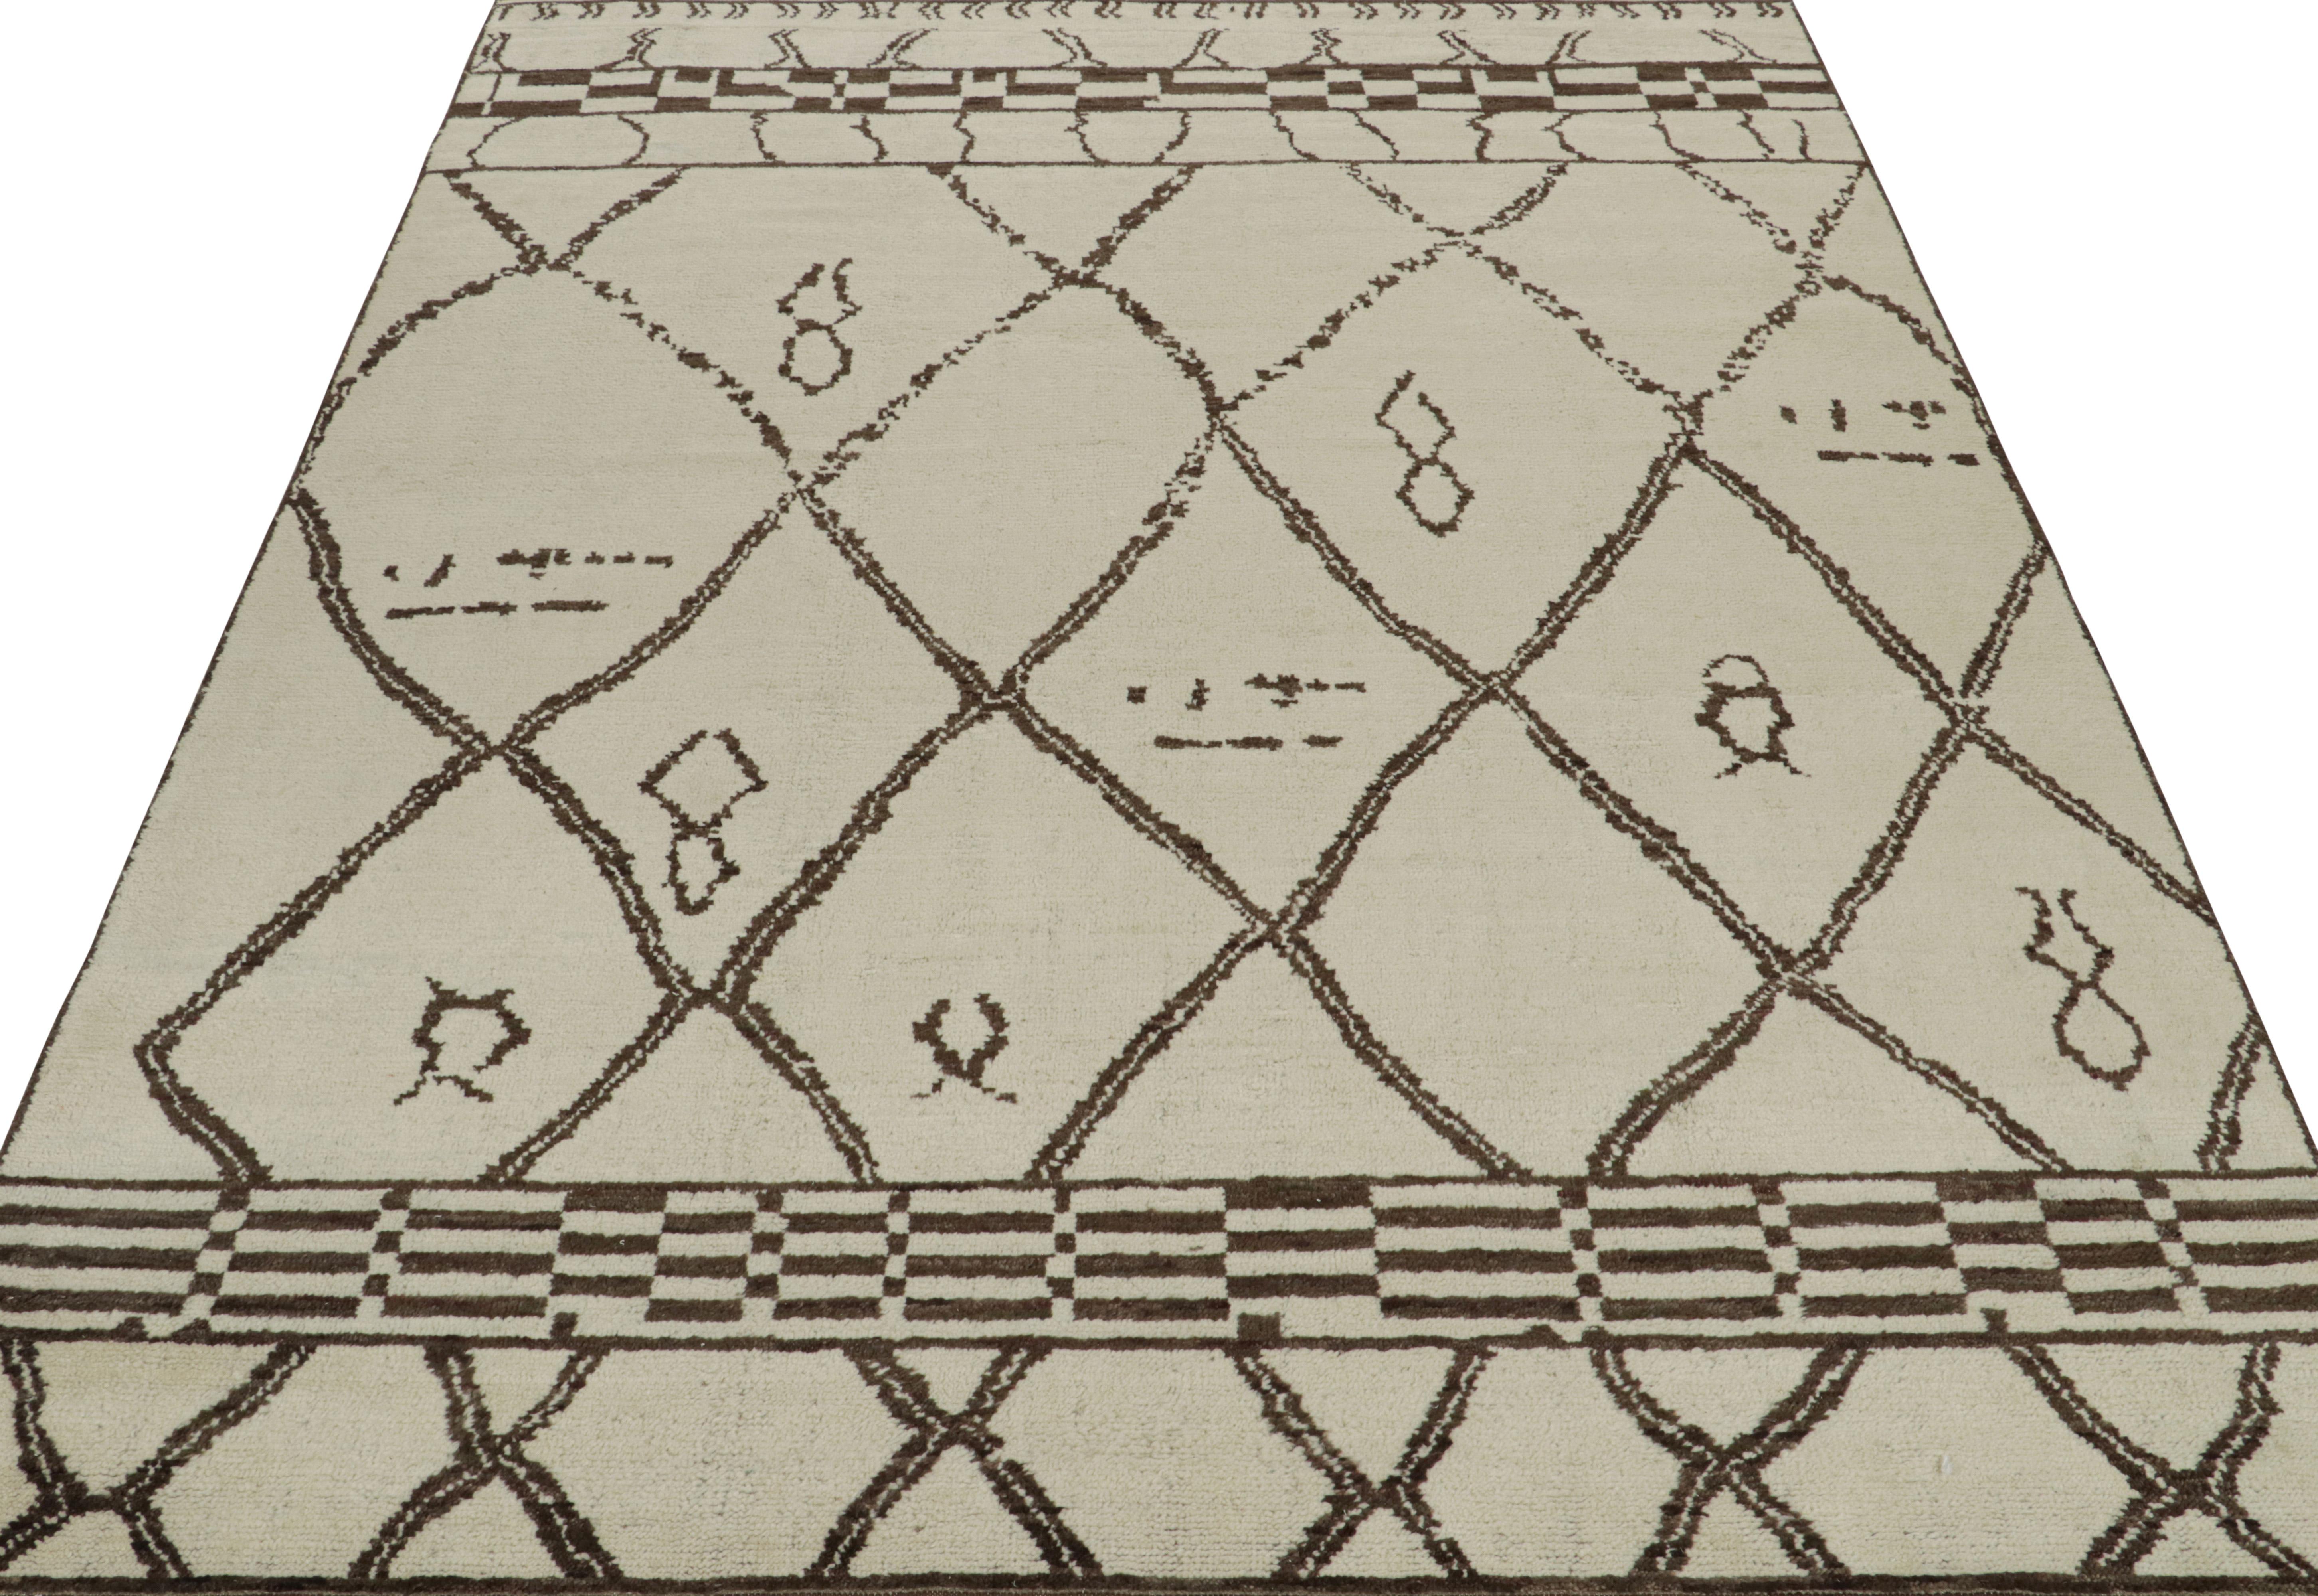 This contemporary 9x12 rug is a grand entry in Rug & Kilim's new Moroccan Collection—a bold take on the iconic style. Hand-knotted in wool and cotton.
Further on the Design:
The piece draws on geometric patterns and archaic motifs in rich brown